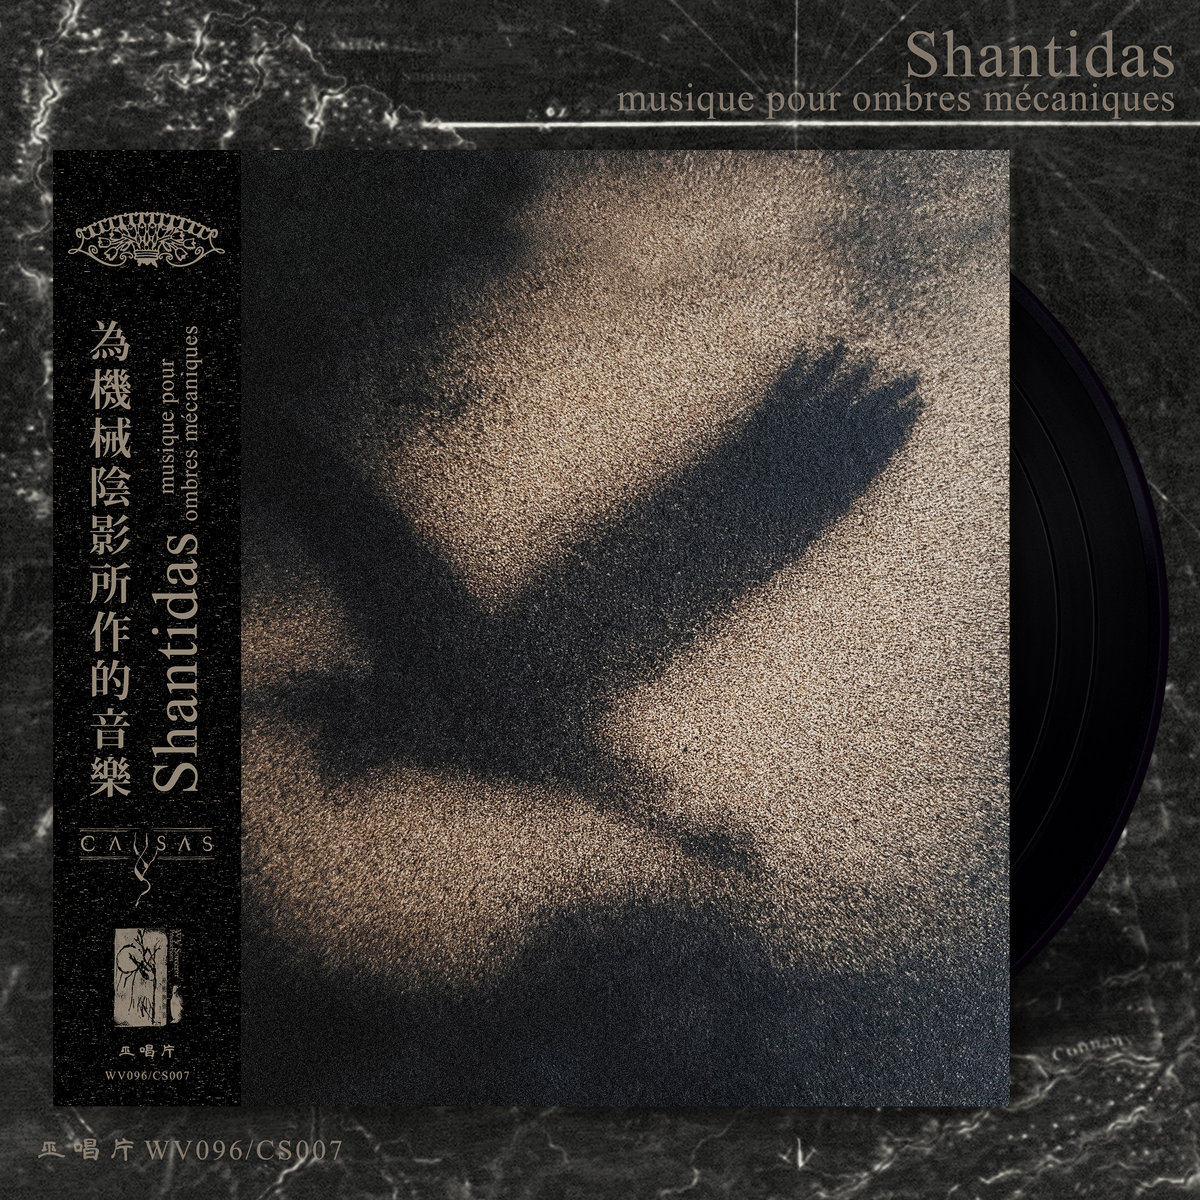 Shantidas : musique pour ombres mécaniques

Shantidas Riedacker, known for his work with Aluk Todolo, Diamatregon, and formerly Blacklodge, is set to release his first full-length solo album, Musique pour Ombres Mécaniques. This work will be available exclusively on vinyl on July 25, 2024, through WV Sorcerer Productions & Cavsas, a division of Cyclic Law.

Musique pour Ombres Mécaniques is a crafted soundtrack designed to accompany light and shadow installations. This album represents a departure from Shantidas' previous explosive and experimental works, delving into a more serene and contemplative soundscape. The music creates an atmosphere that is both immersive and introspective, inviting listeners to experience the interplay between light and shadow through sound. Experience the mesmerizing soundscapes of Shantidas as he bridges the worlds of music, light, and shadow with Musique pour Ombres Mécaniques.

Shantidas has carved a unique niche in the world of avant-garde and experimental music. His diverse career includes bold and innovative projects that push the boundaries of sound and performance. From his fiery experiments with firecrackers to his unconventional use of vinyl turntables and an electrified shopping cart, Shantidas is constantly exploring new frontiers in music. Now, he returns to his roots with the guitar to create an ambient and intimate sonic journey.

The album will be released on vinyl, emphasizing the tactile and analog nature of Shantidas' artistic vision. This format is not only a nod to the traditional roots of music consumption but also enhances the auditory experience, allowing listeners to fully appreciate the nuances and textures of the soundscapes created.

WV Sorcerer Productions & Cavsas (a division of Cyclic Law), are known for supporting artists who challenge conventional genres and push the limits of musical creativity. This partnership with Shantidas is a testament to their commitment to fostering innovative and avant-garde music.



▼

Album of Inselberg (bassist of Aluk Todolo) also available:
wvsorcerer.bandcamp.com/album/voyage-d-hiver  
crédits
paraît le 25 juillet 2024

Shantidas Riedacker:
Guitars Lado Falcon, Lado Superfalcon, and Jacobacci Studio II
Amplifiers Fender Twin Reverb & Fender Bassman

Voyage, recorded at Studios Blast, 19th May 2023
Horizon, recorded at Studios Blast, 26th November 2022

Mastering by Frédéric Arbour
Illustrations by Julia Dantonnet
Photography with collodion wet plate process by Yanick Burgund


© & ℗ WV Sorcerer Productions & Cavsas 2024
www.facebook.com/wvsorcerer
www.youtube.com/c/wvsorcerer
Instagram: @wv_sorcerer_productions
巫唱片

www.facebook.com/cycliclaw
cycliclaw.com
www.facebook.com/shantidas.solo
shantidas.bandcamp.com
Instagram: @cycliclaw @shantidaslight @aluk_todolo_official @amortout 